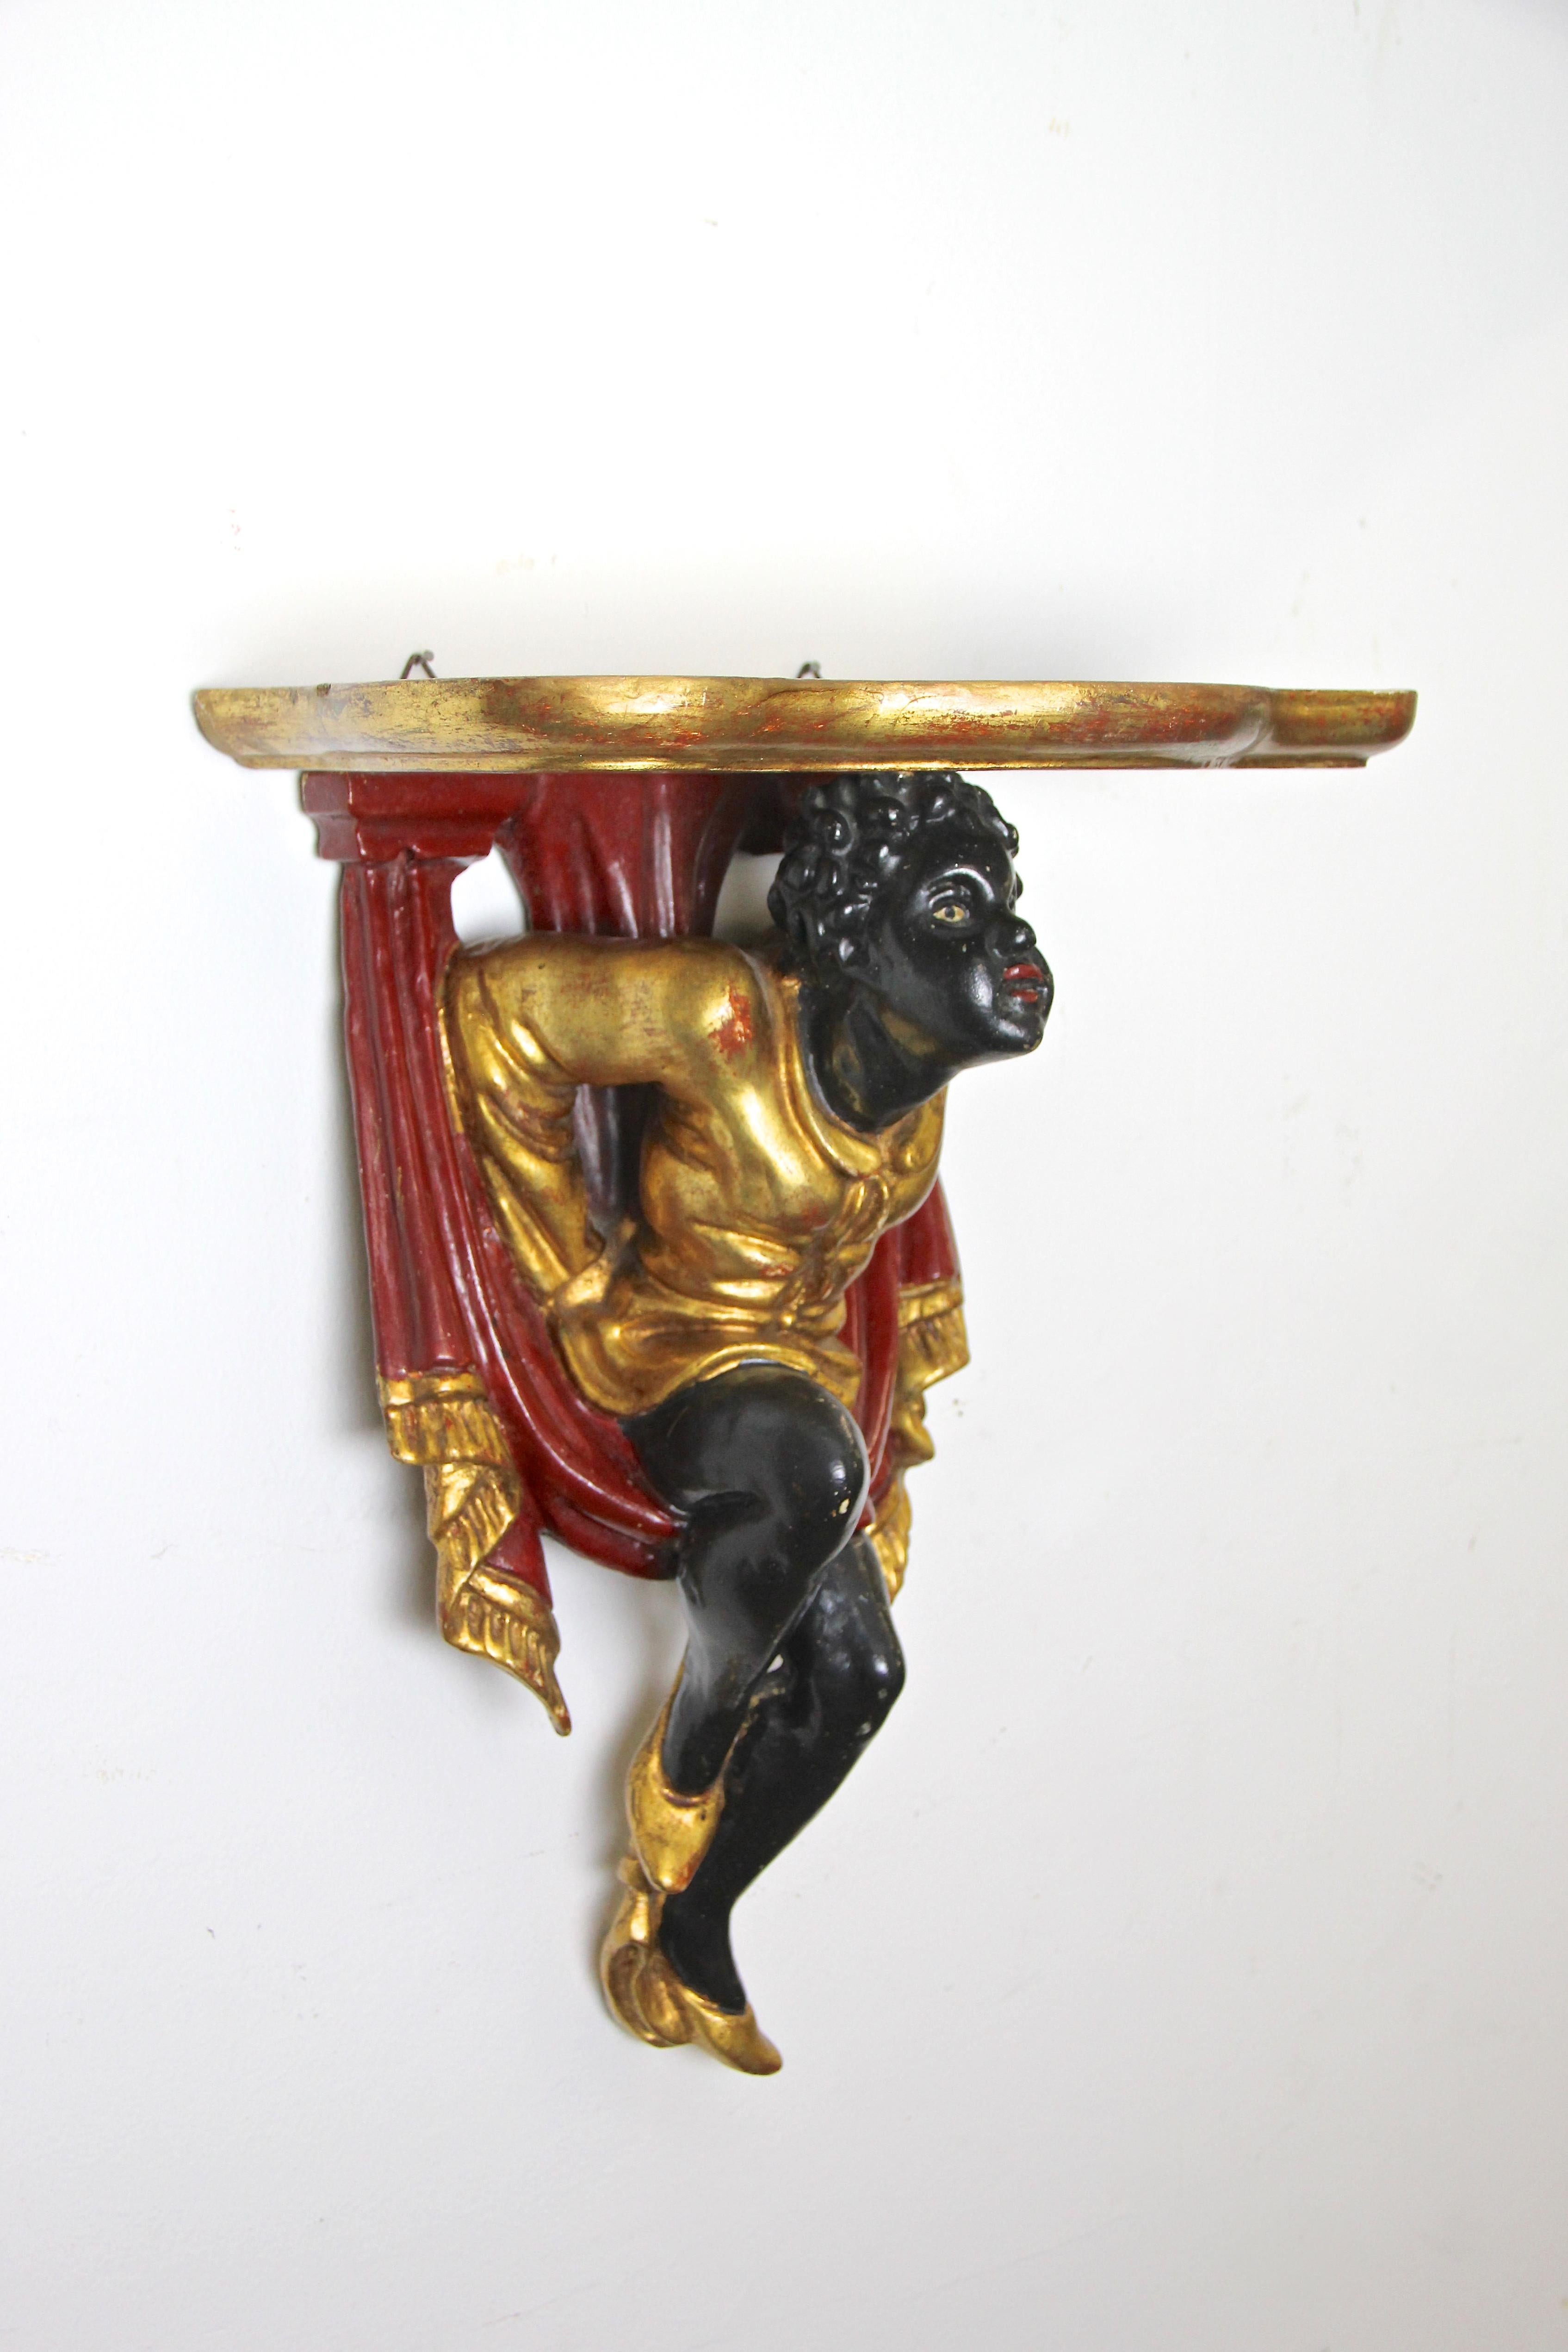 Gorgeous small Baroque Revival wall console from Austria, circa 1910. This beautiful carved wall console depicts a moor in a golden robe swinging in a red curtain. The whole sculpture was hand carved out of one wooden piece, only the gilt top plate